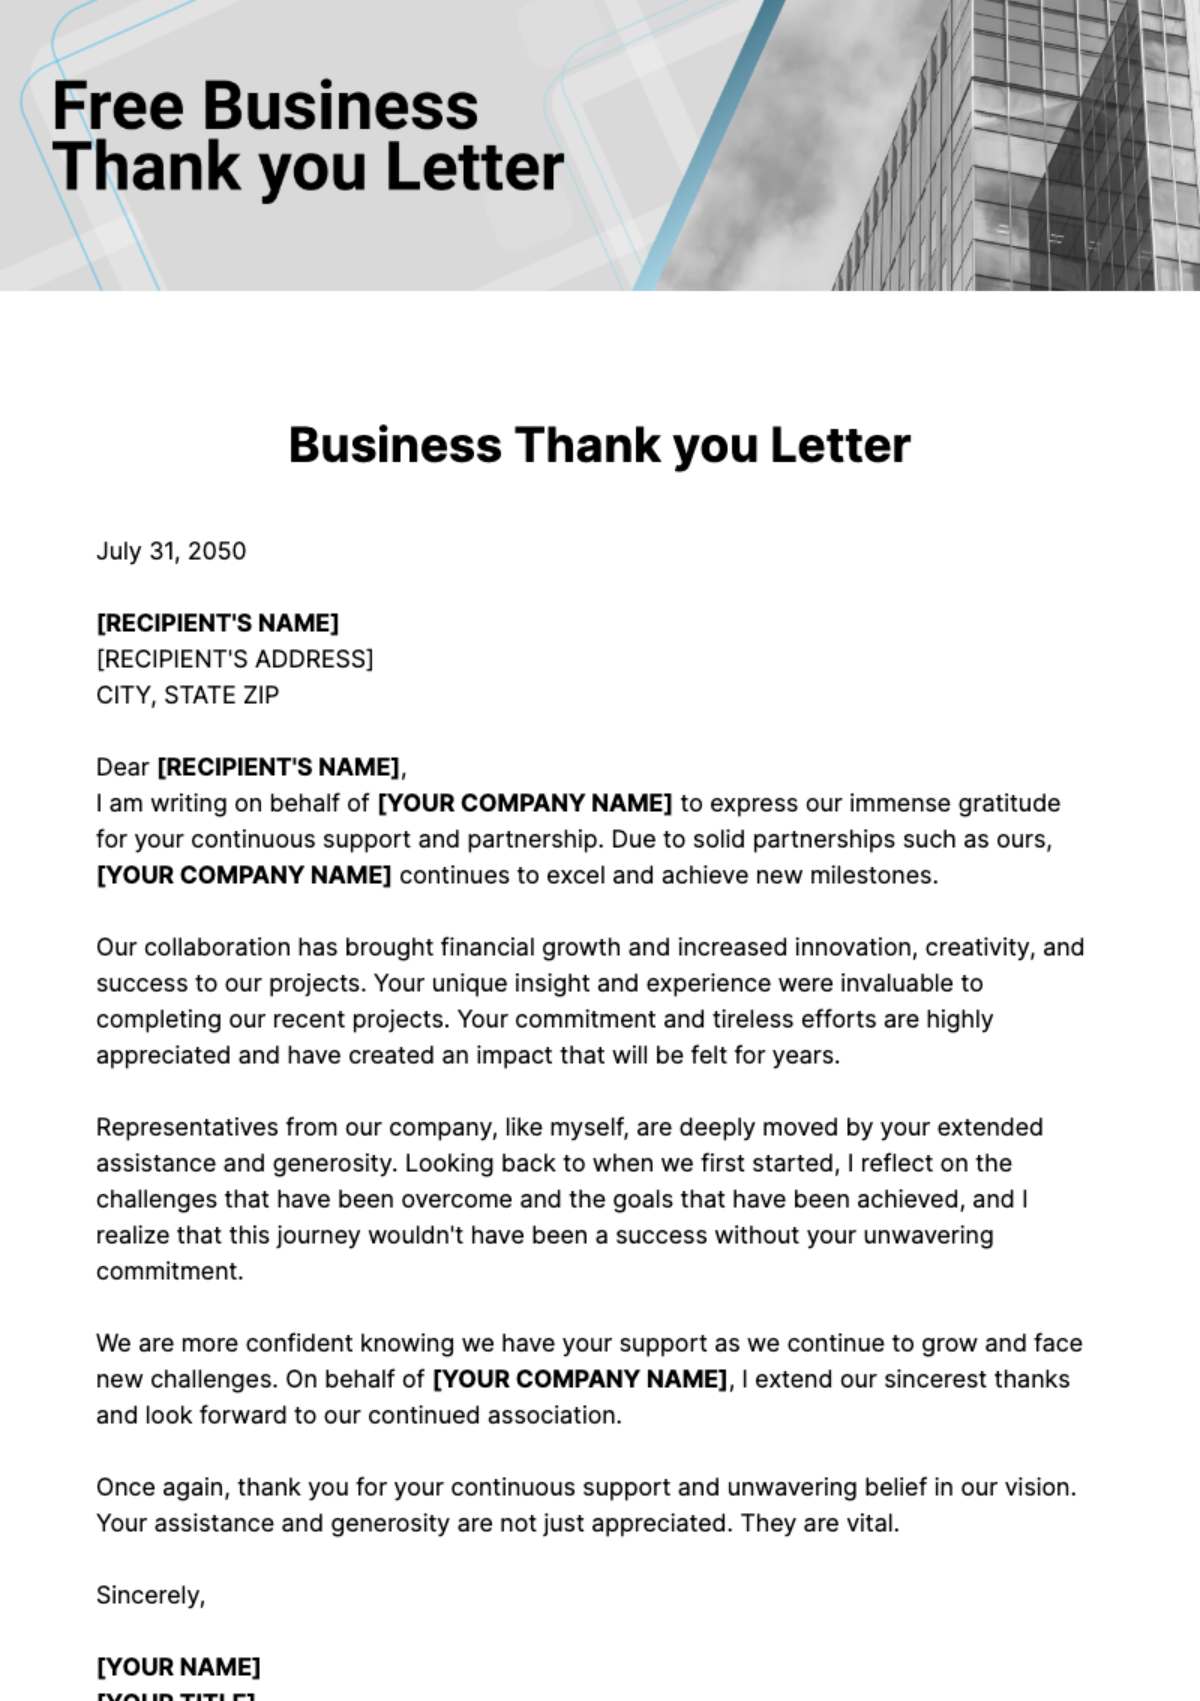 Free Business Thank you Letter Template